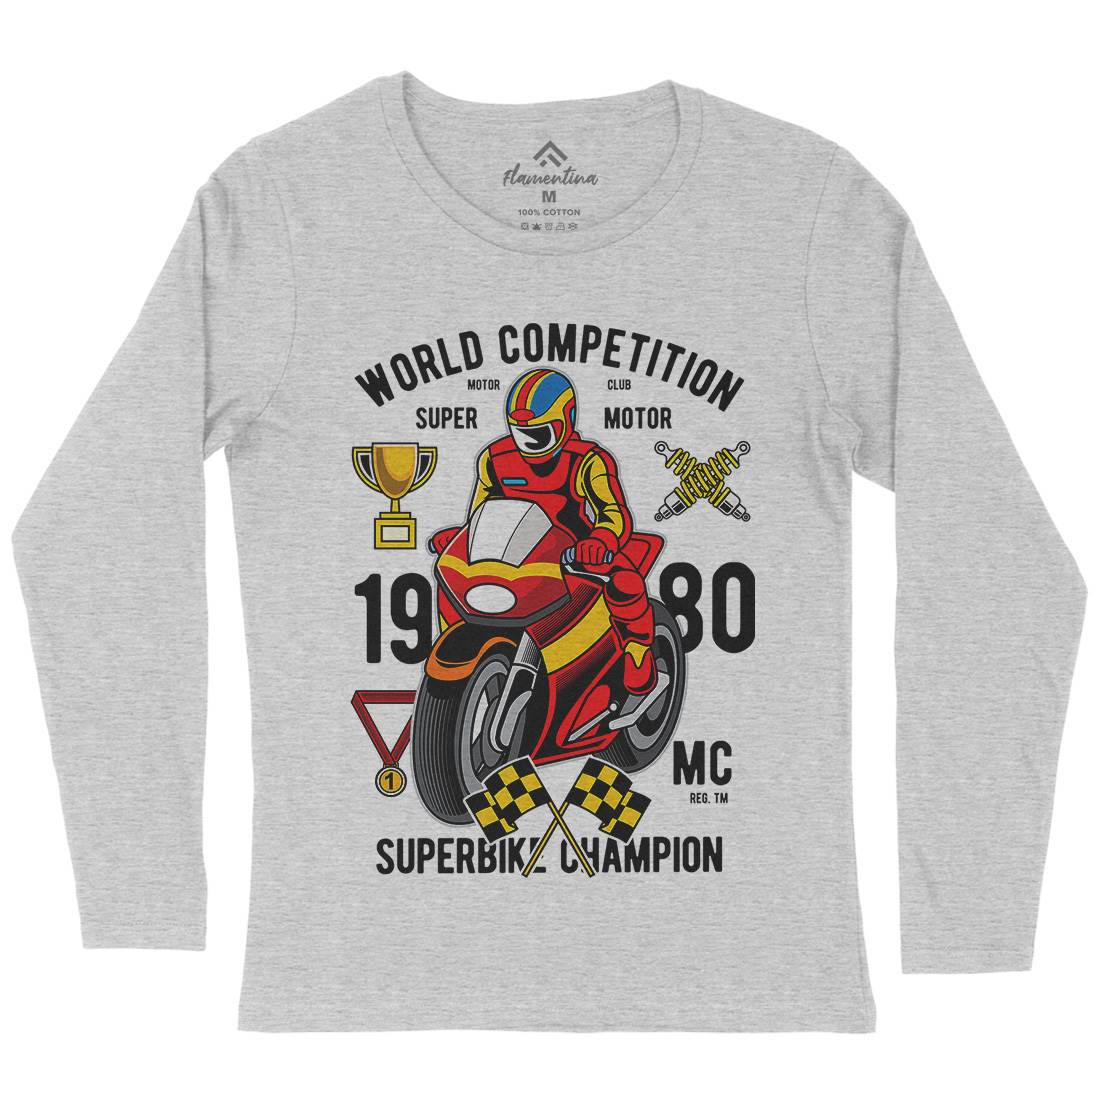 Super Bike World Competition Womens Long Sleeve T-Shirt Motorcycles C458